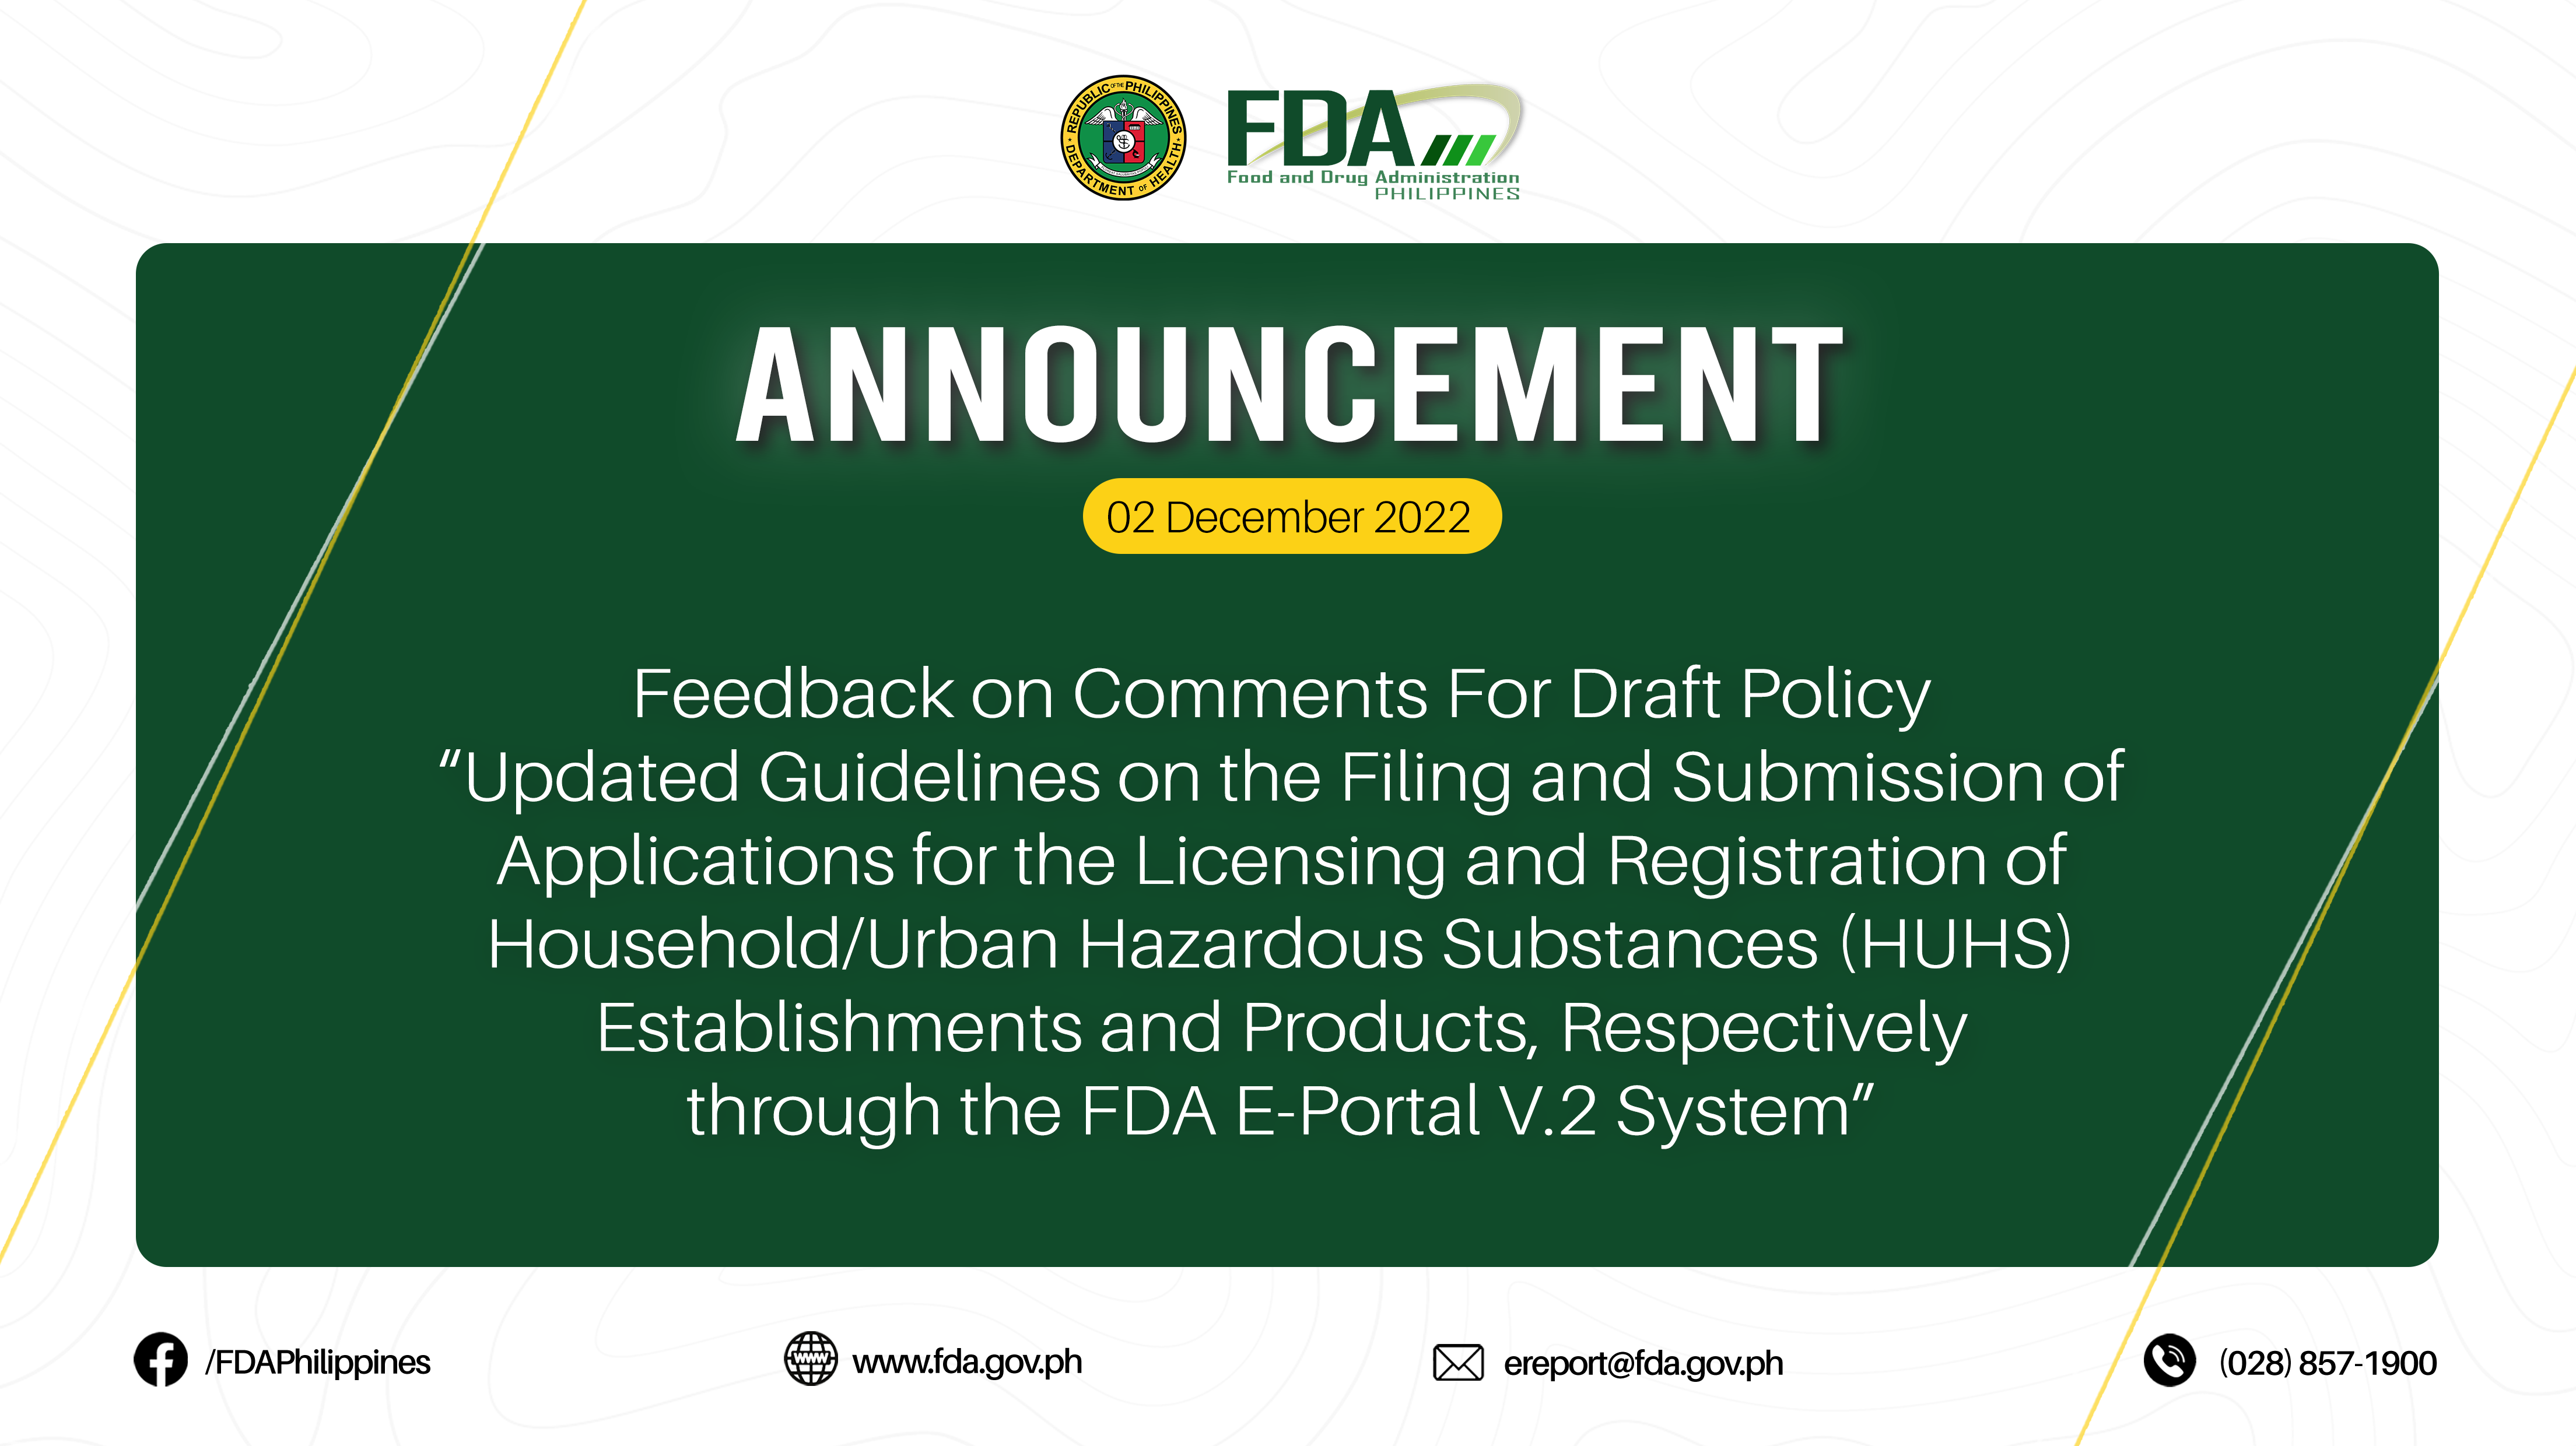 Announcement || Feedback on Comments For Draft Policy “Updated Guidelines on the Filing and Submission of Applications for the Licensing and Registration of Household/Urban Hazardous Substances (HUHS) Establishments and Products, Respectively through the FDA E-Portal V.2 System”